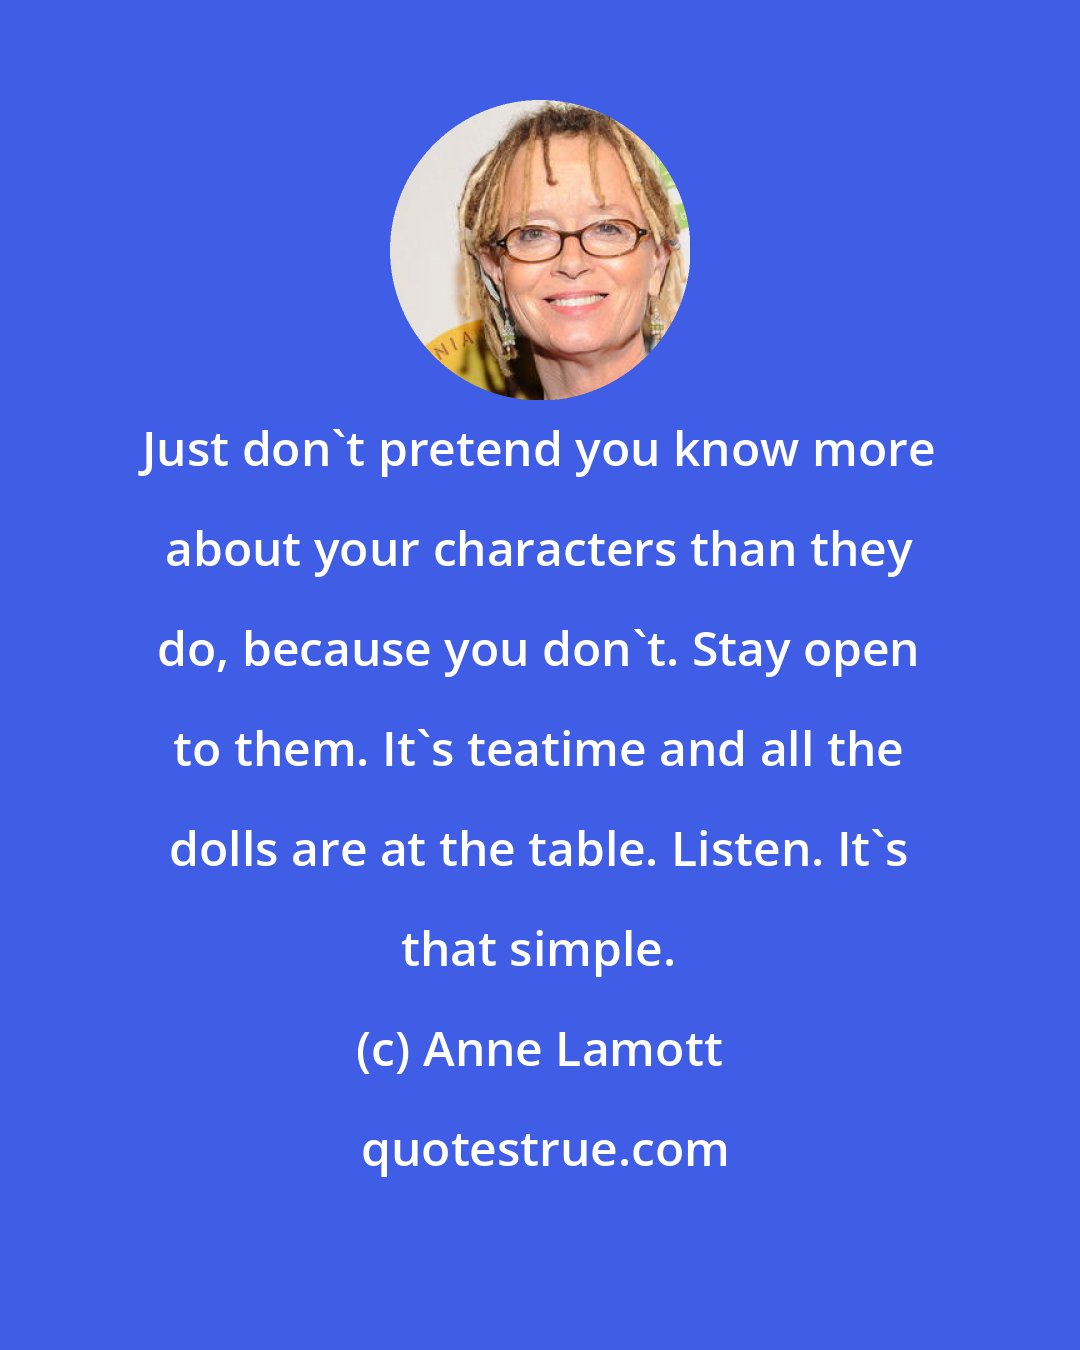 Anne Lamott: Just don't pretend you know more about your characters than they do, because you don't. Stay open to them. It's teatime and all the dolls are at the table. Listen. It's that simple.